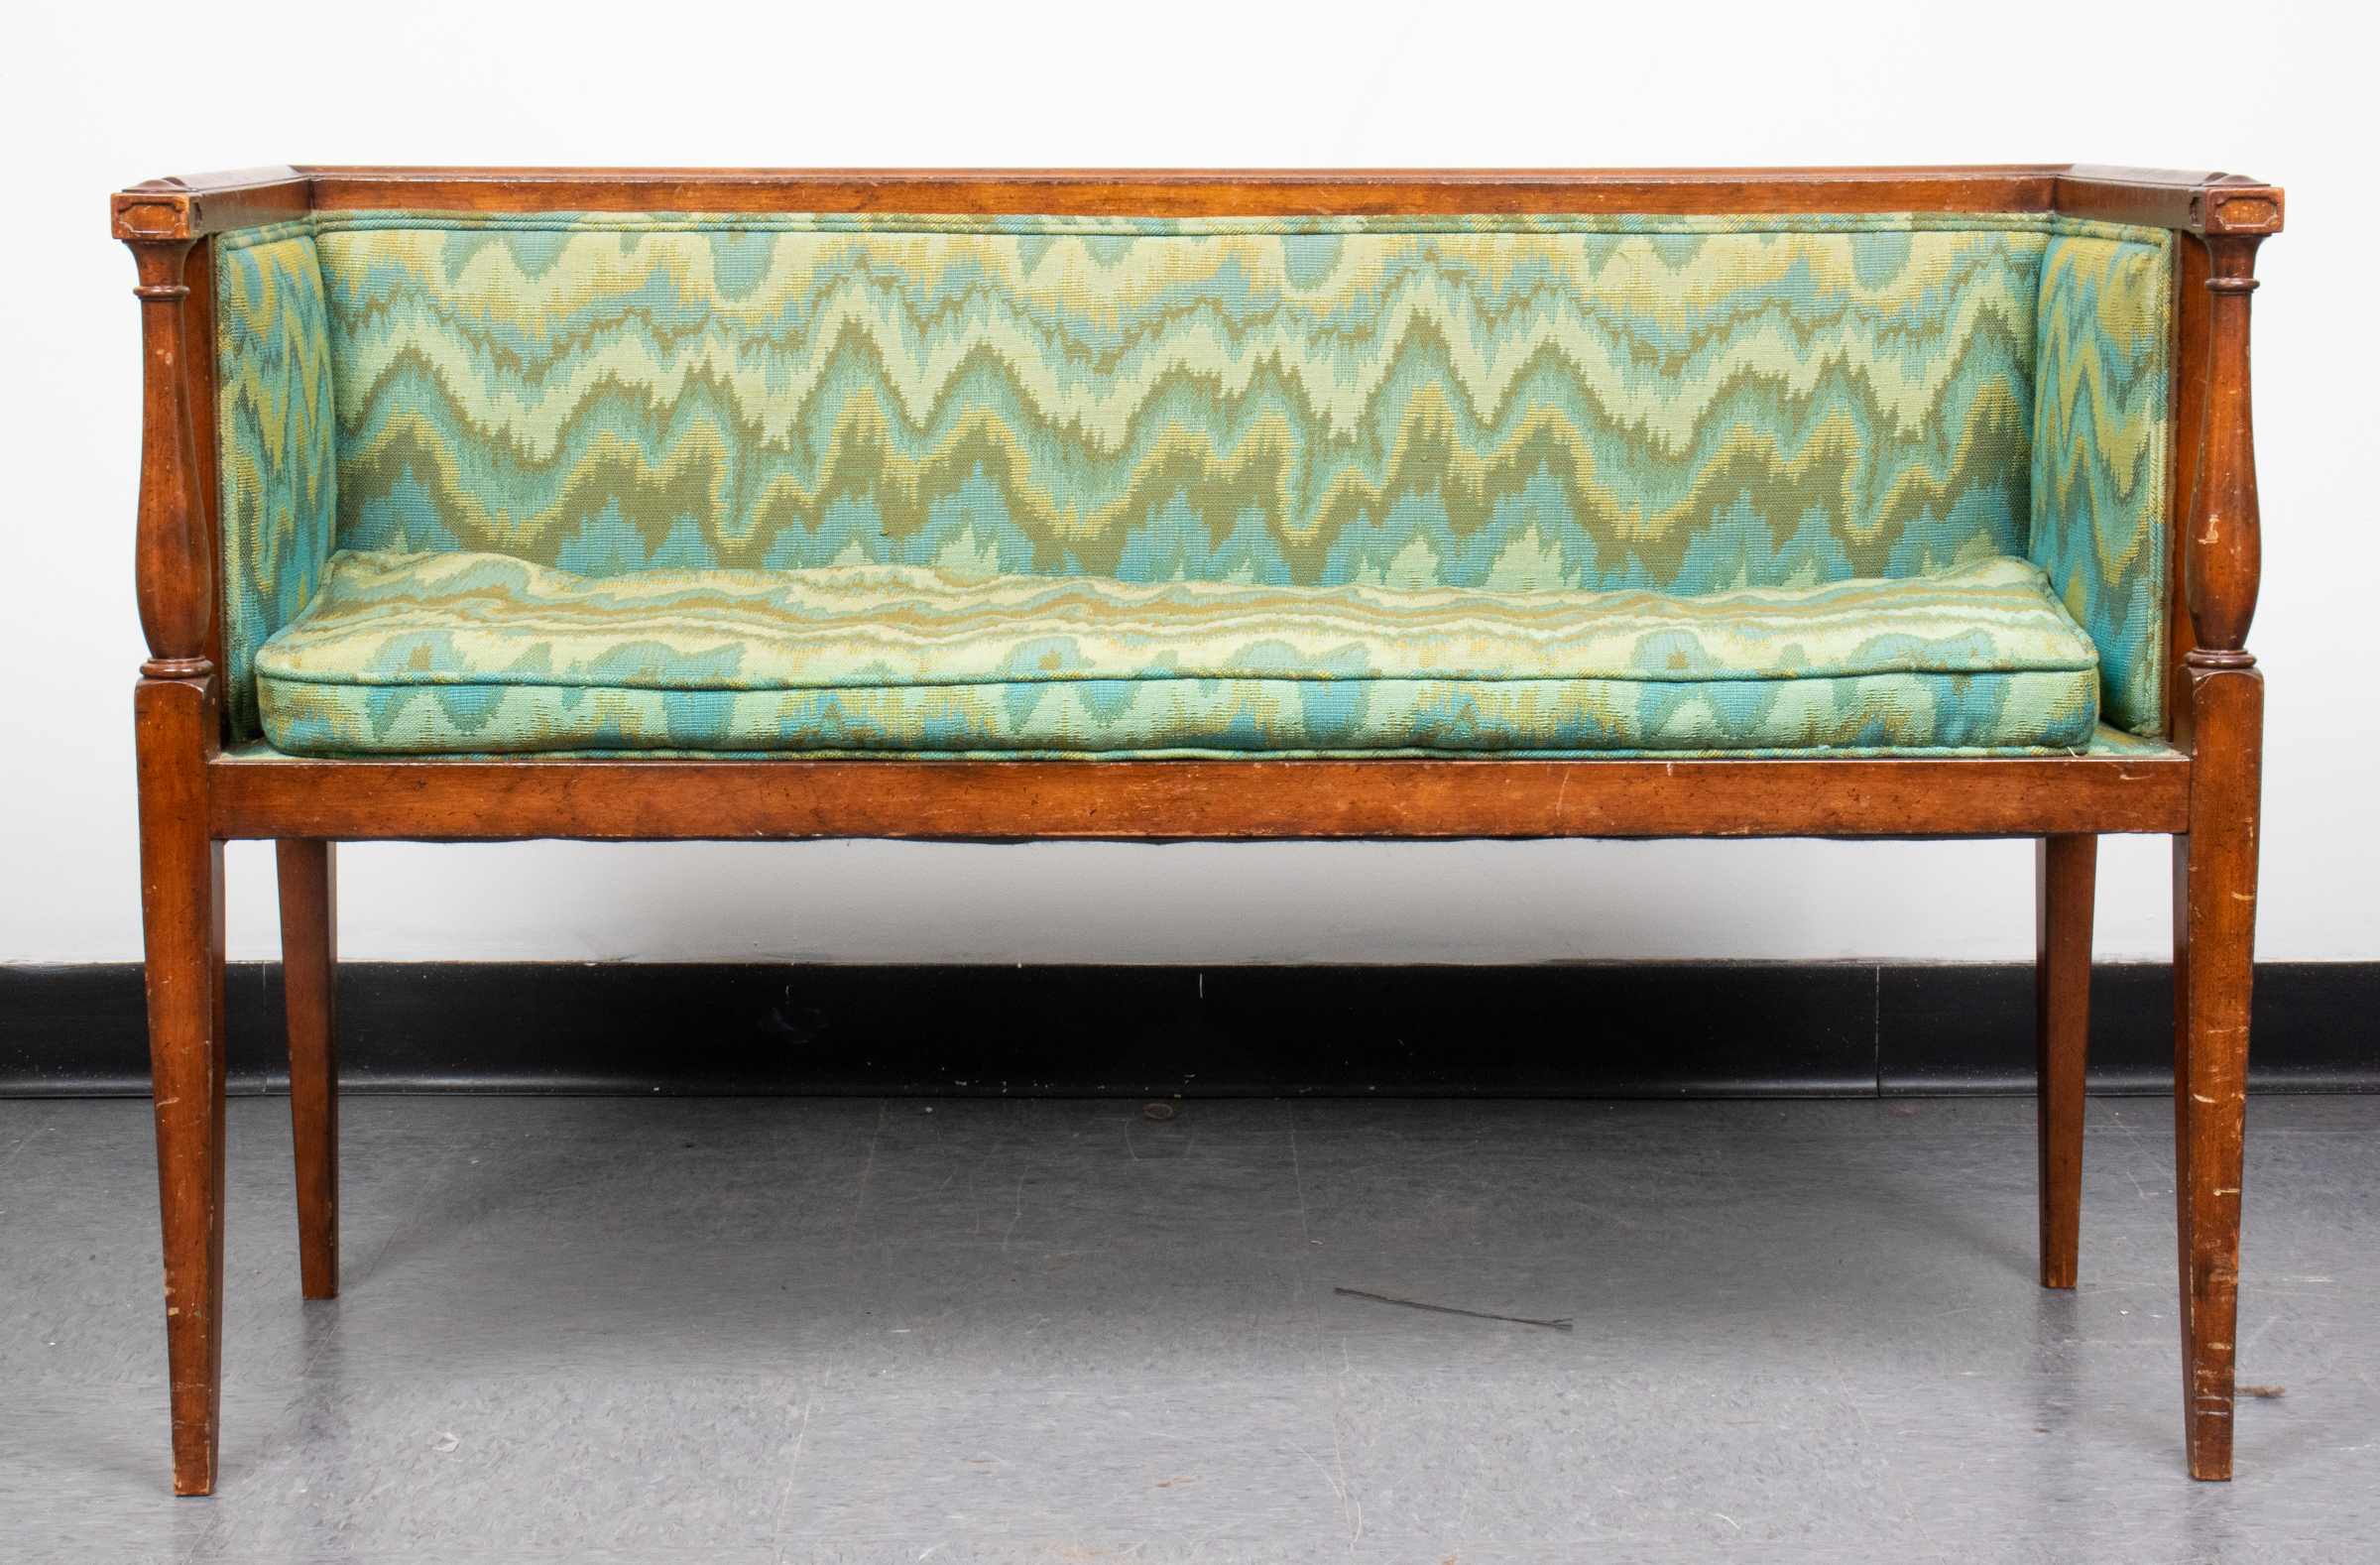 FEDERAL STYLE FLAME-STITCH UPHOLSTERED